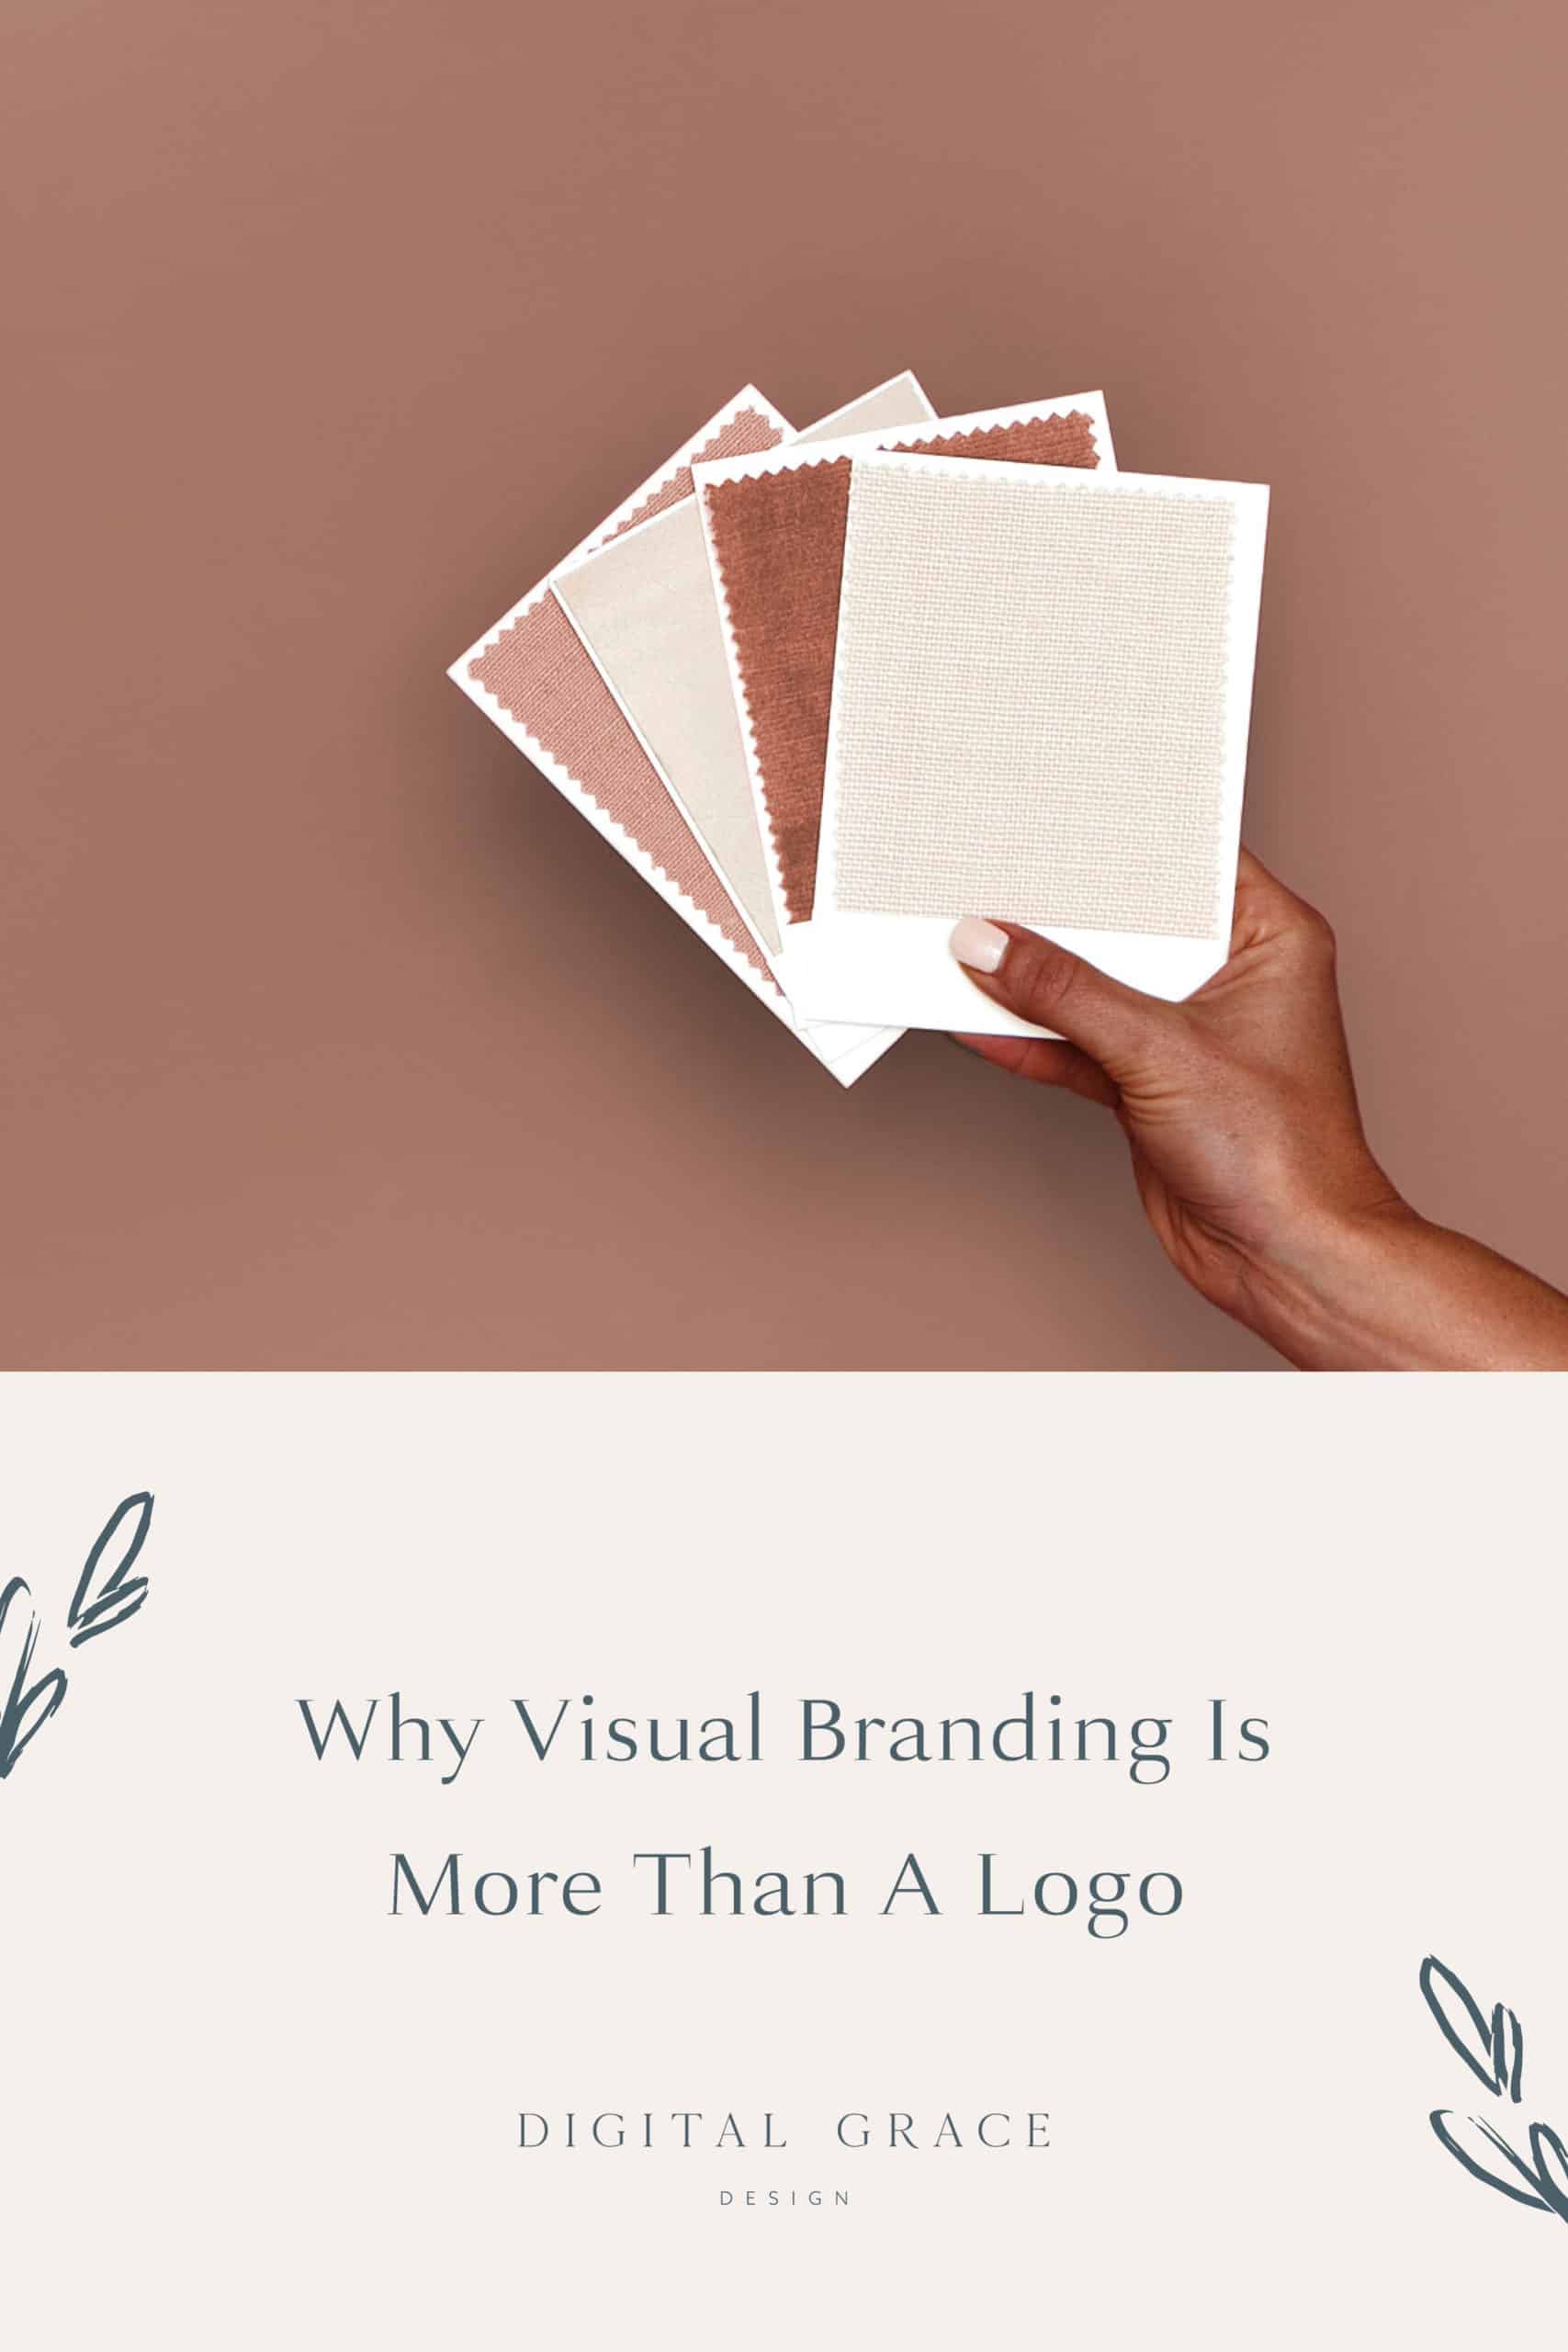 Why Visual Branding Is More Than a Logo